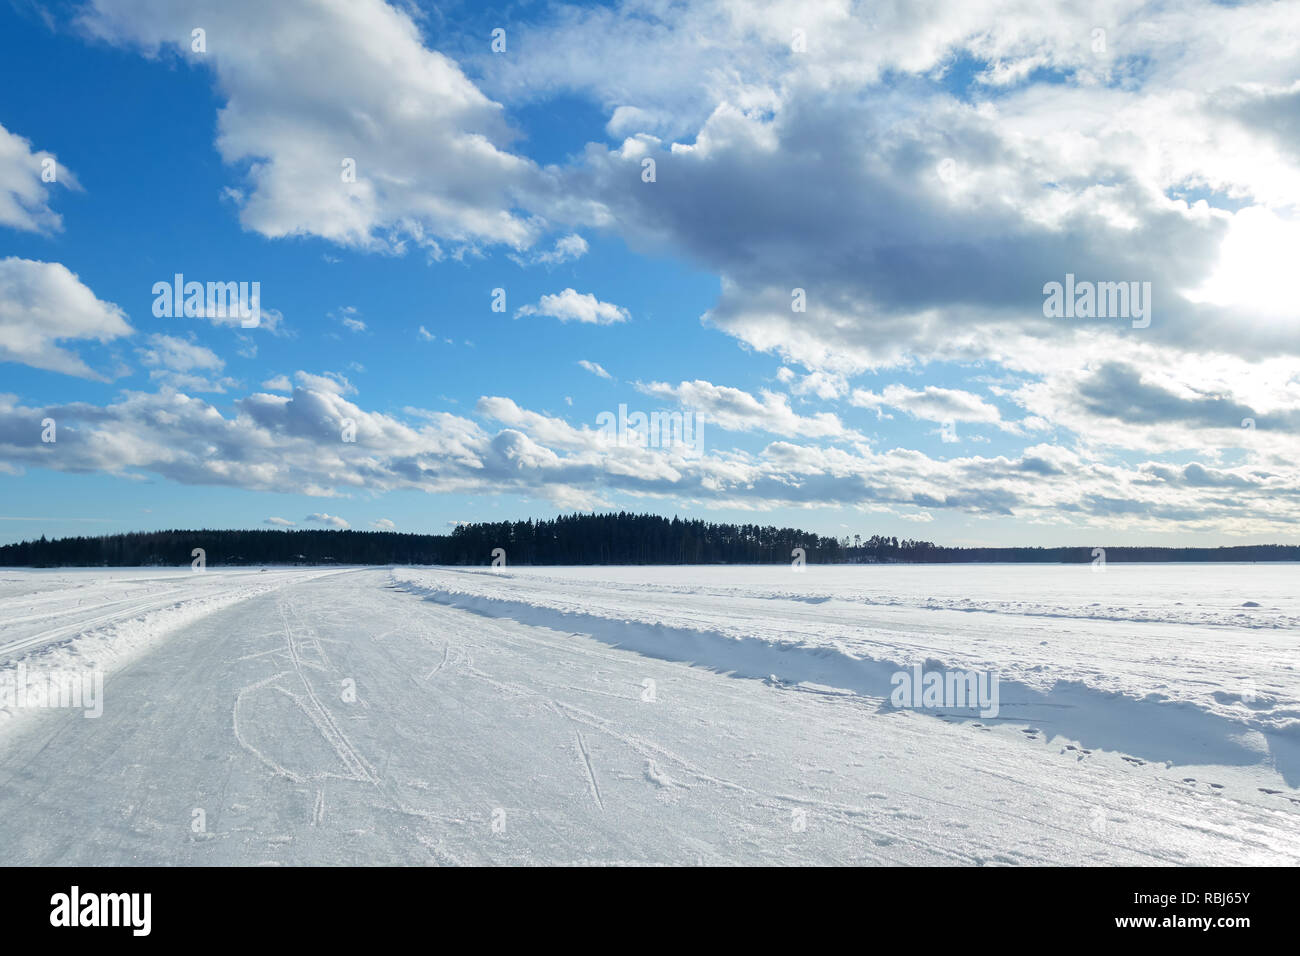 Slippery road on the ice of frozen lake on a sunny winter day in Finland. White snow and clouds on blue sky.Beautifull winter landscape. Stock Photo